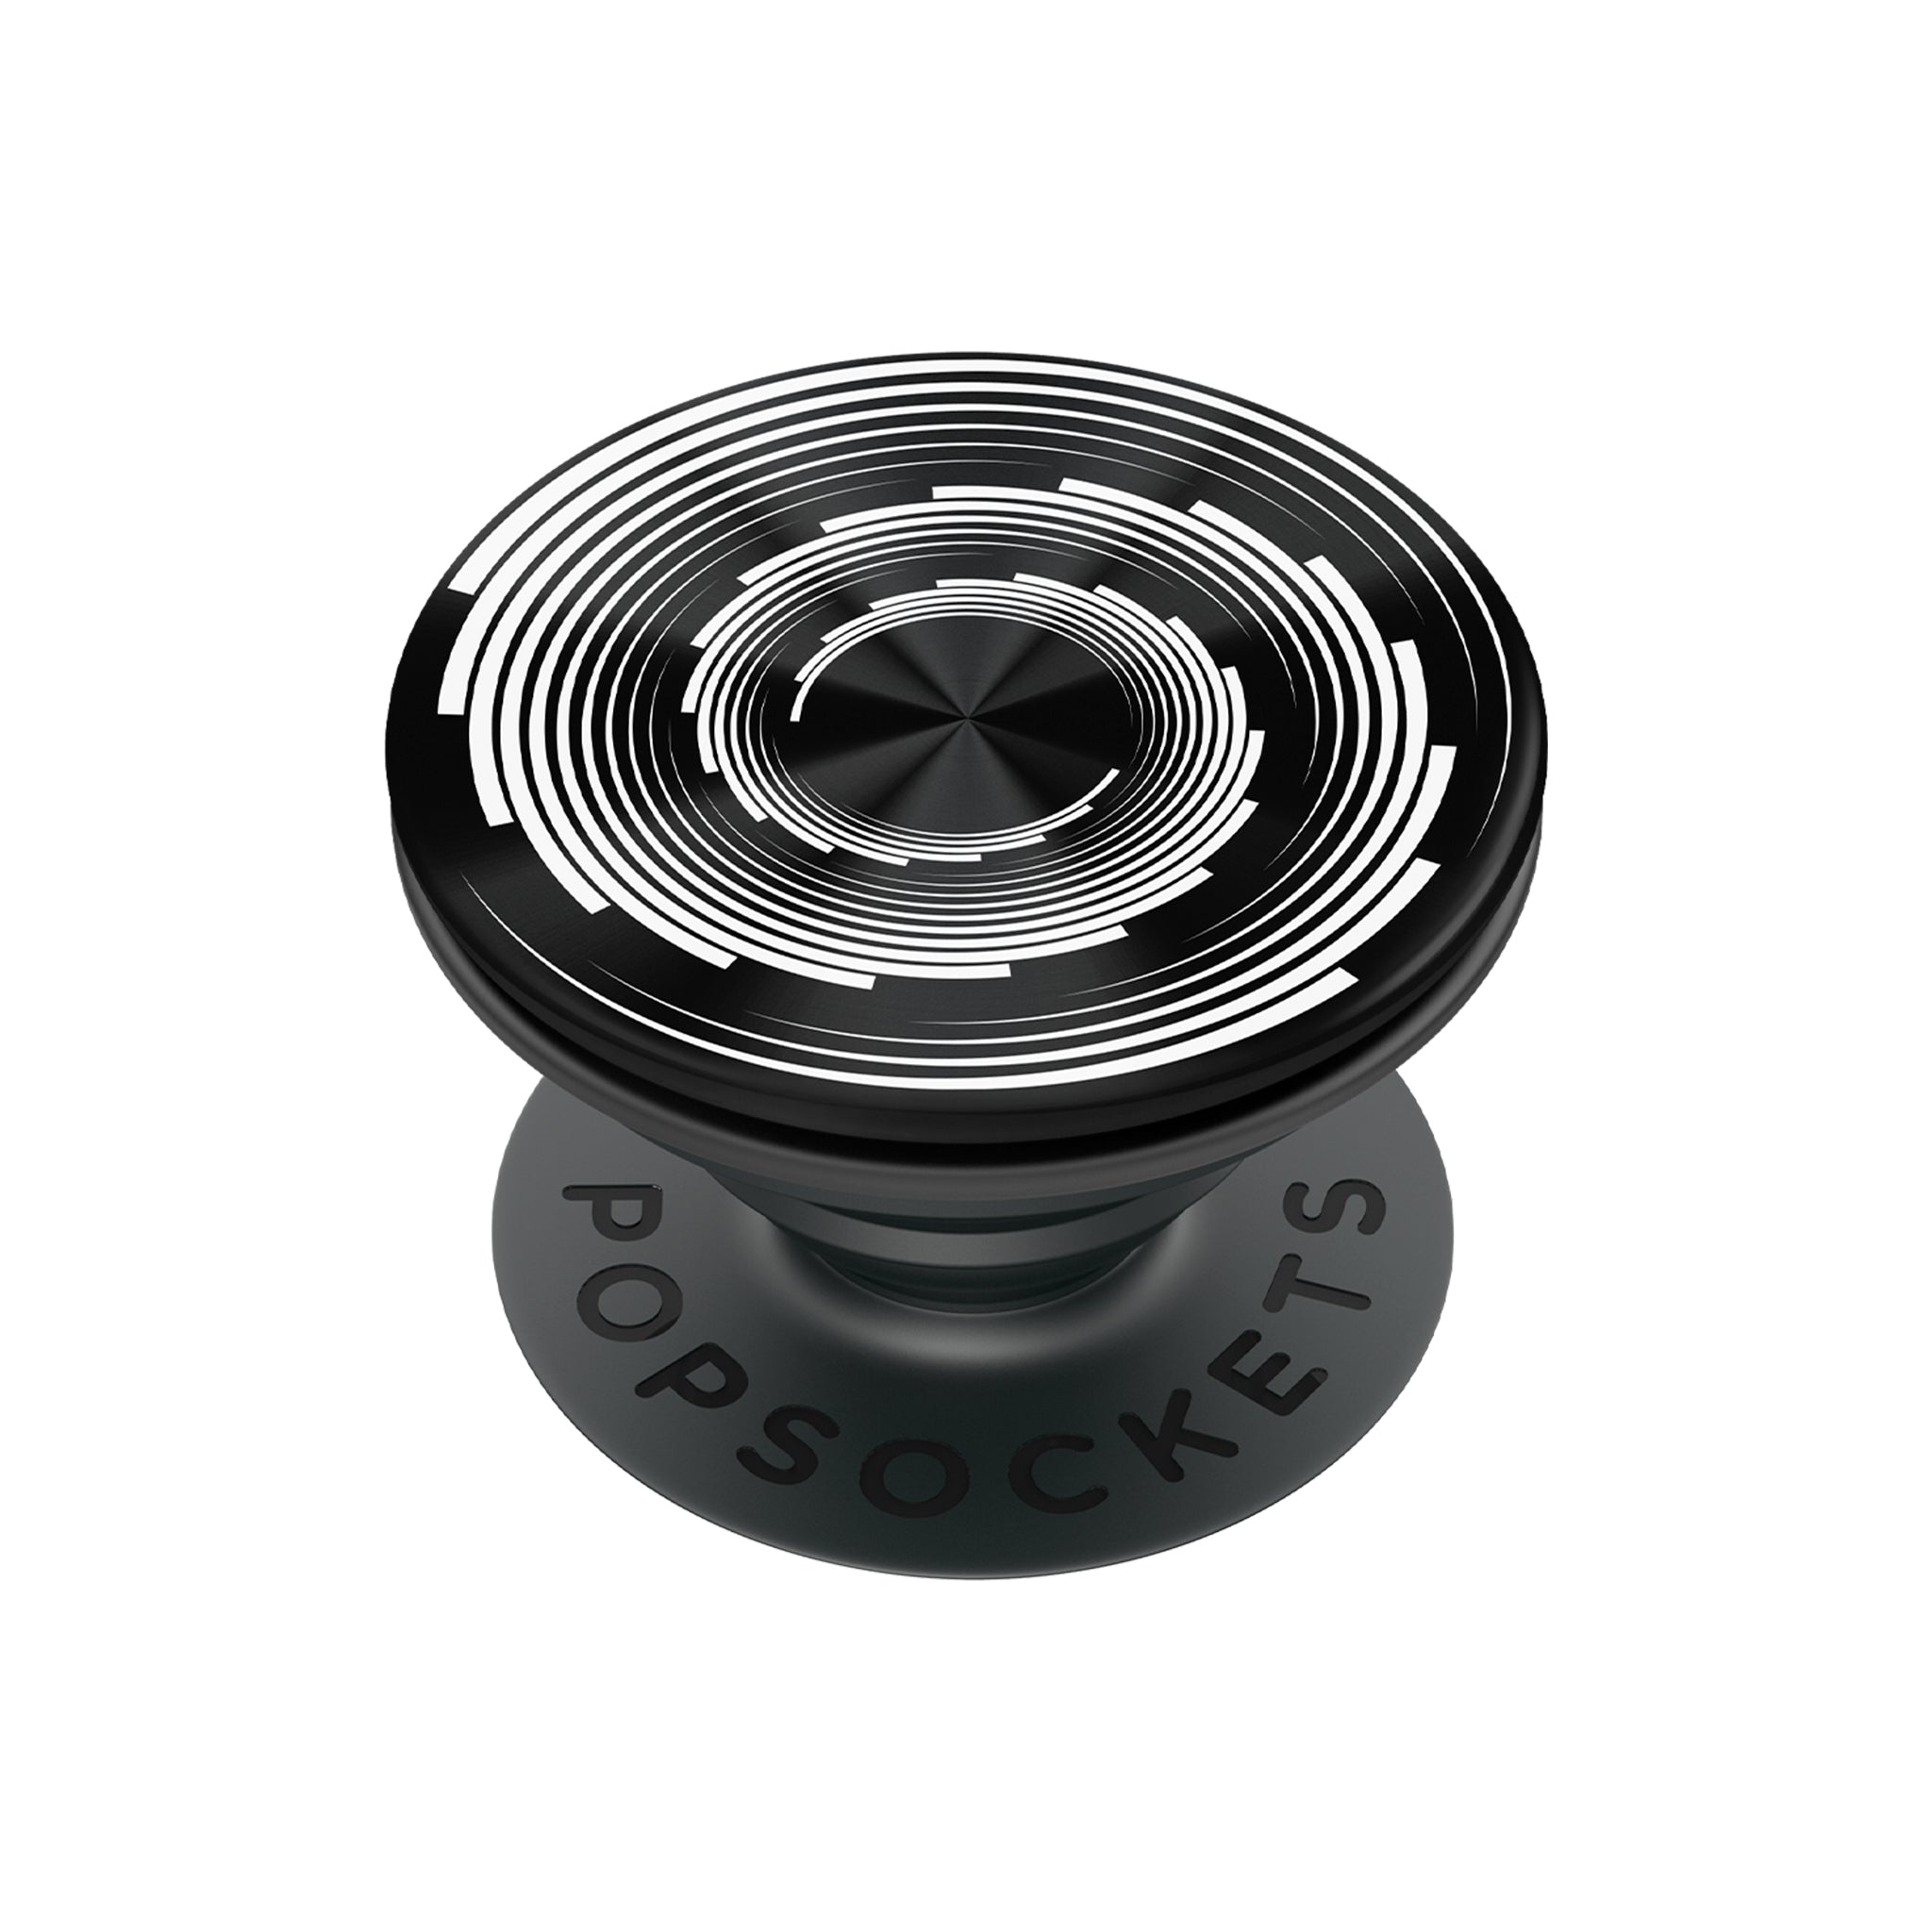 Popsockets - Popgrip Premium Backspin Swappable Device Stand And Grip - Endless Waves